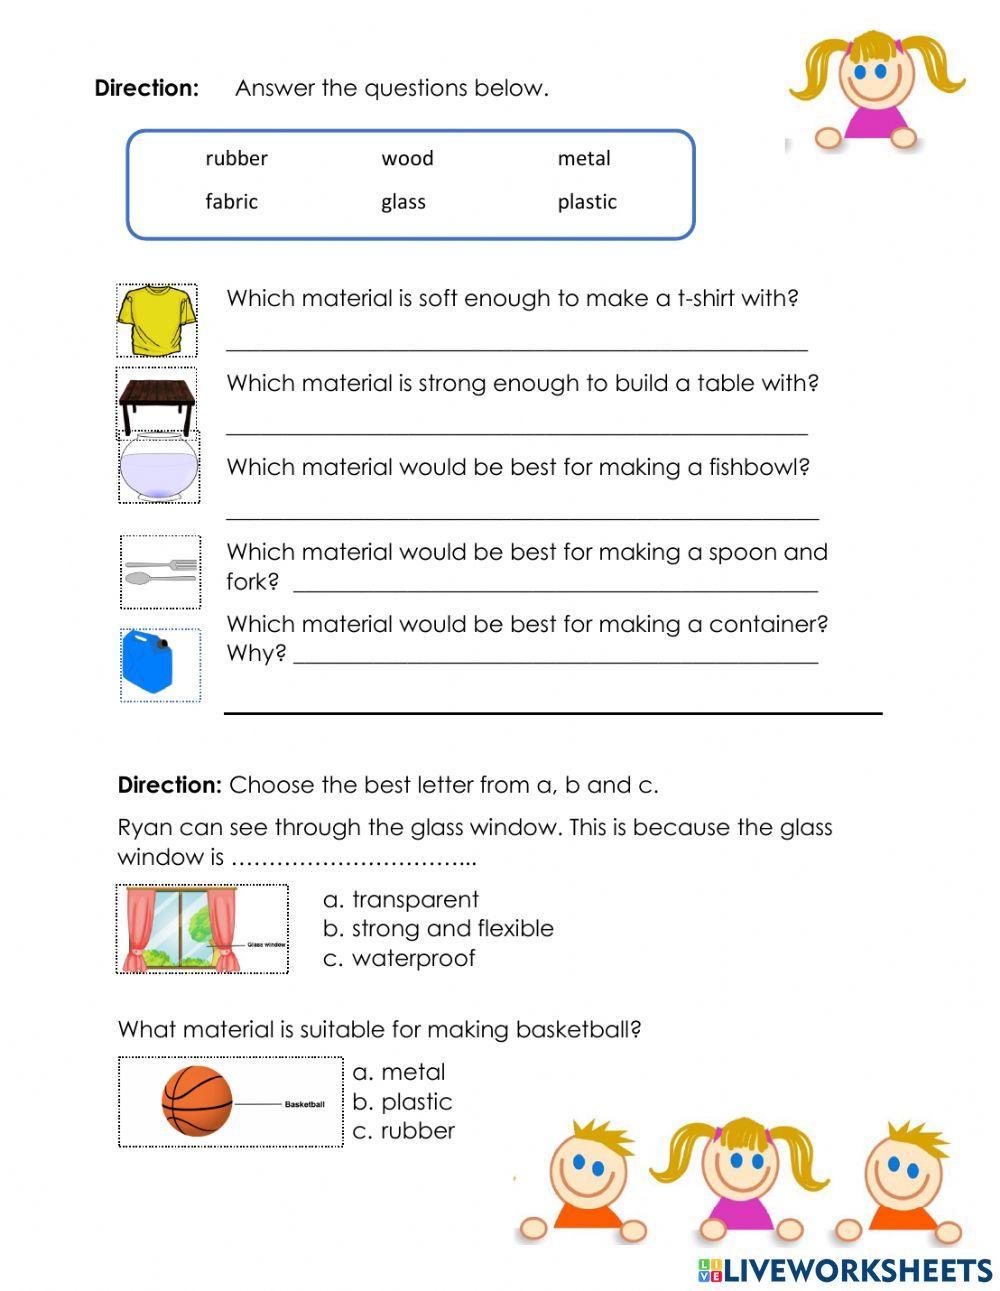 Materials and their properties.